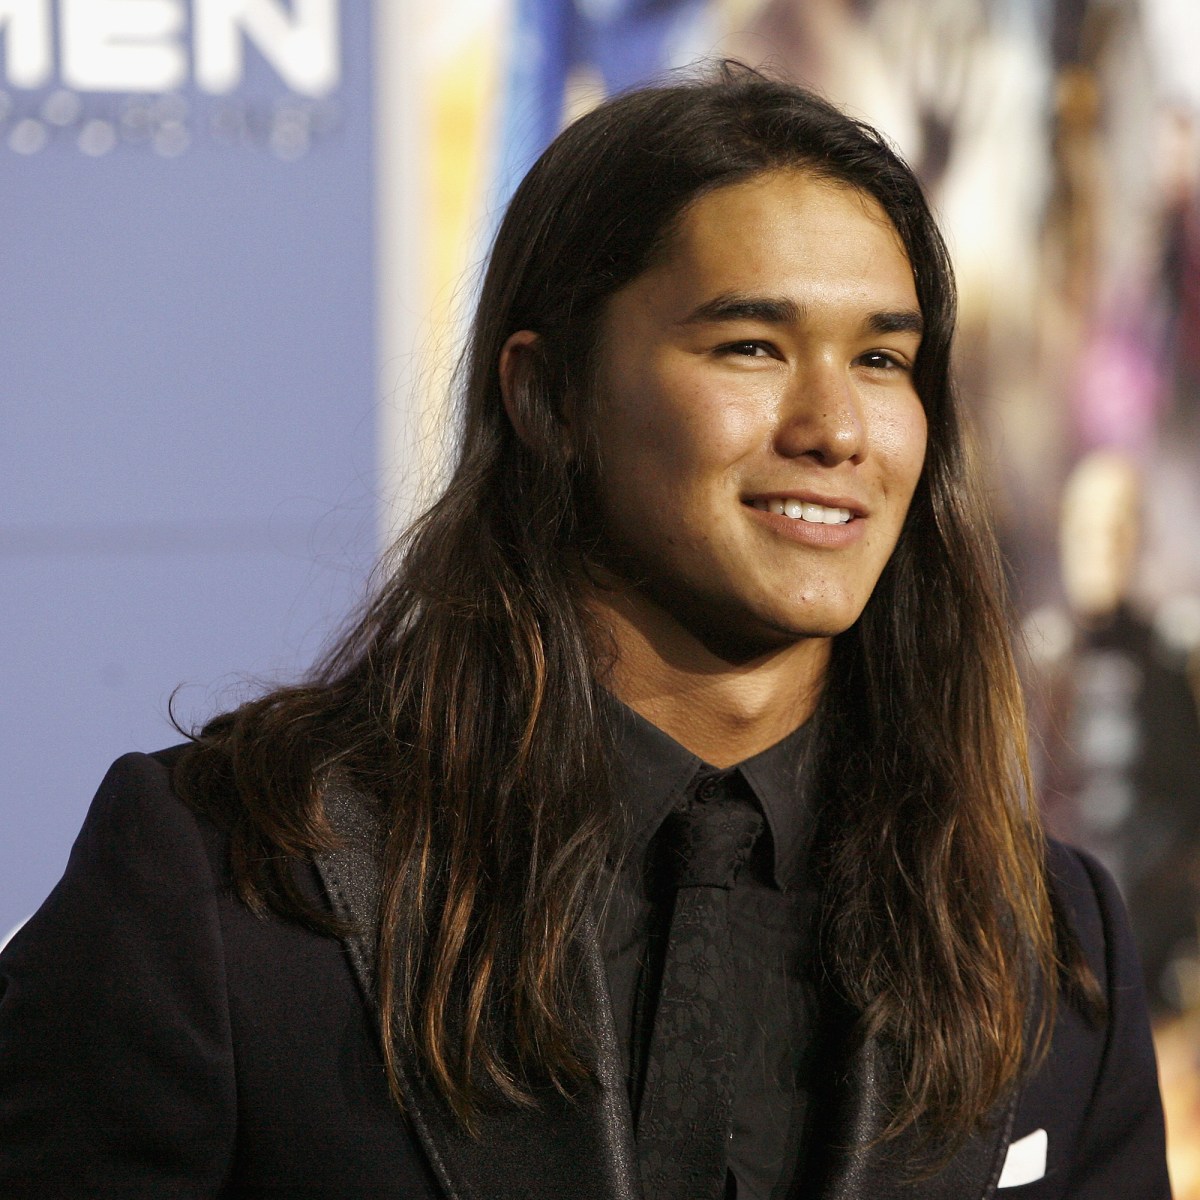 Booboo Stewart Real Name Follow The Descendants Cast On